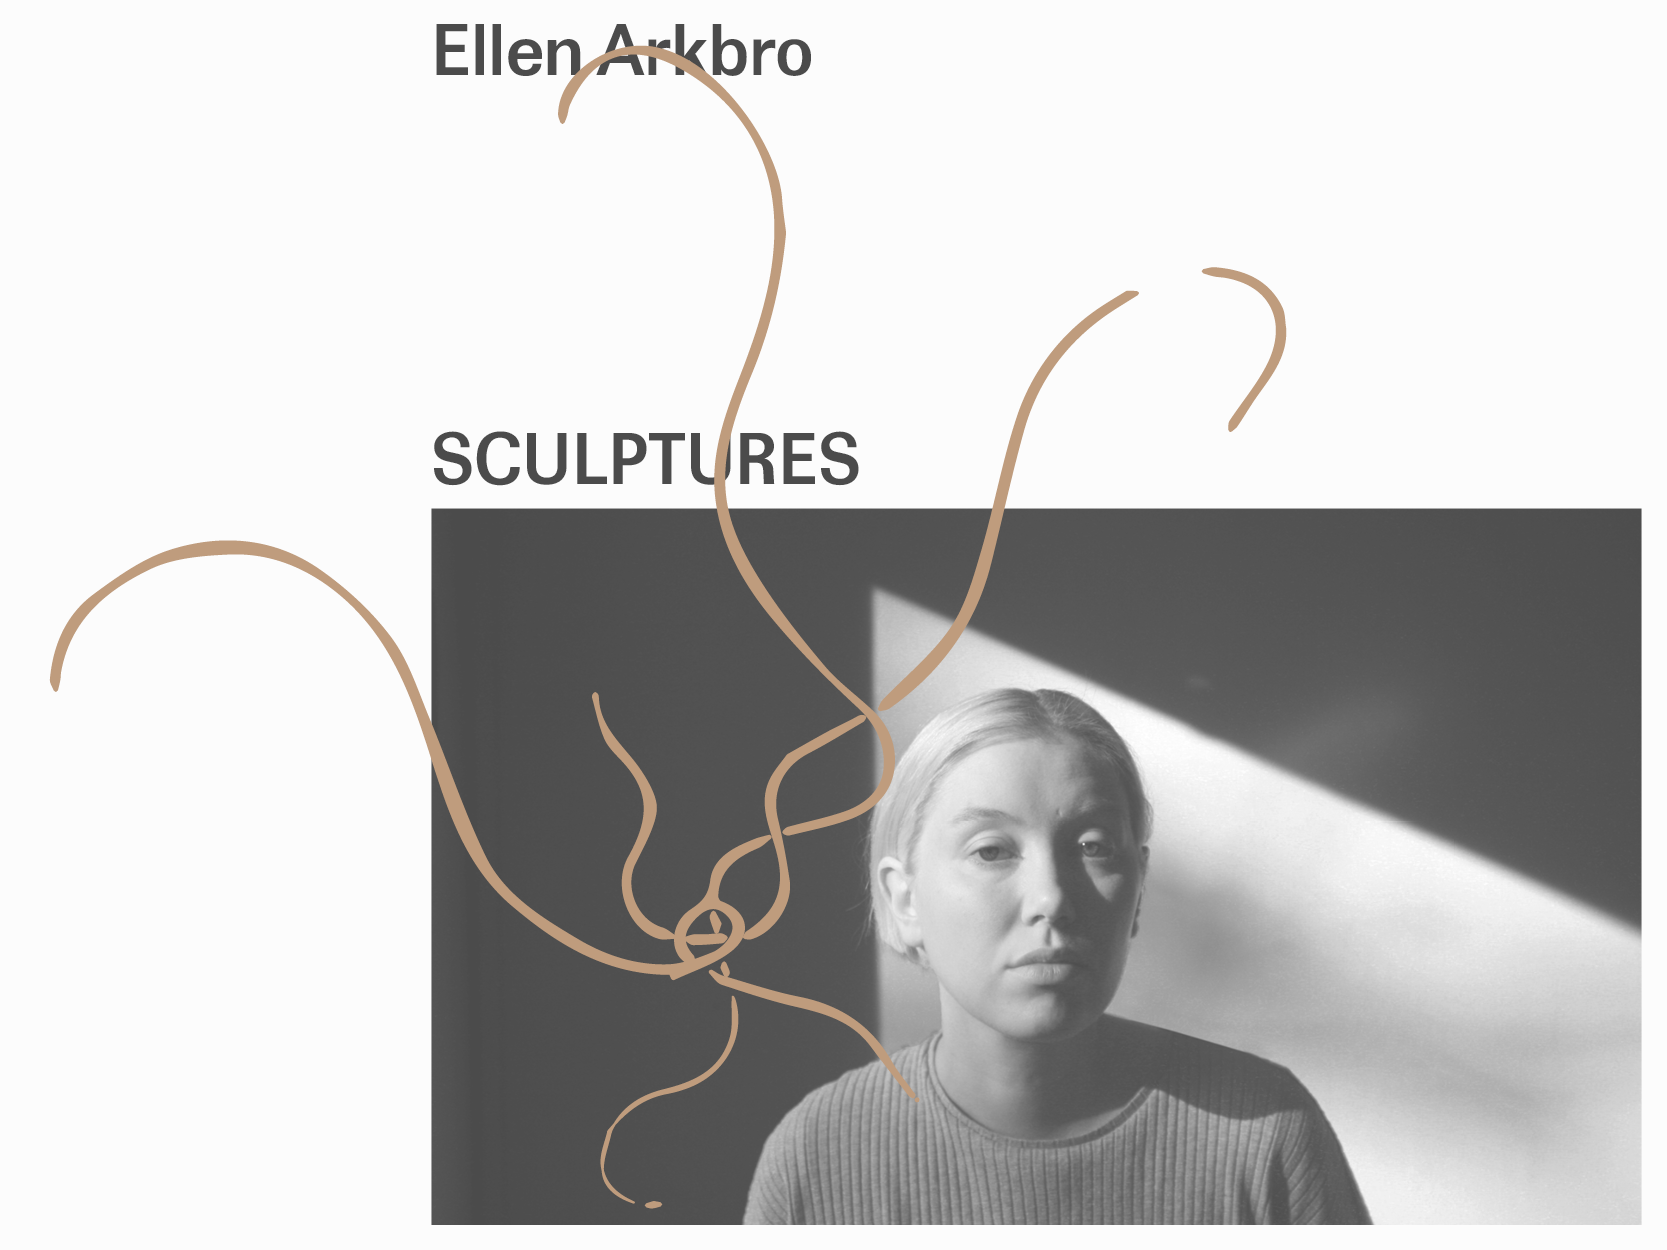 Image of Ellen Arkbro with an abstract design element. 